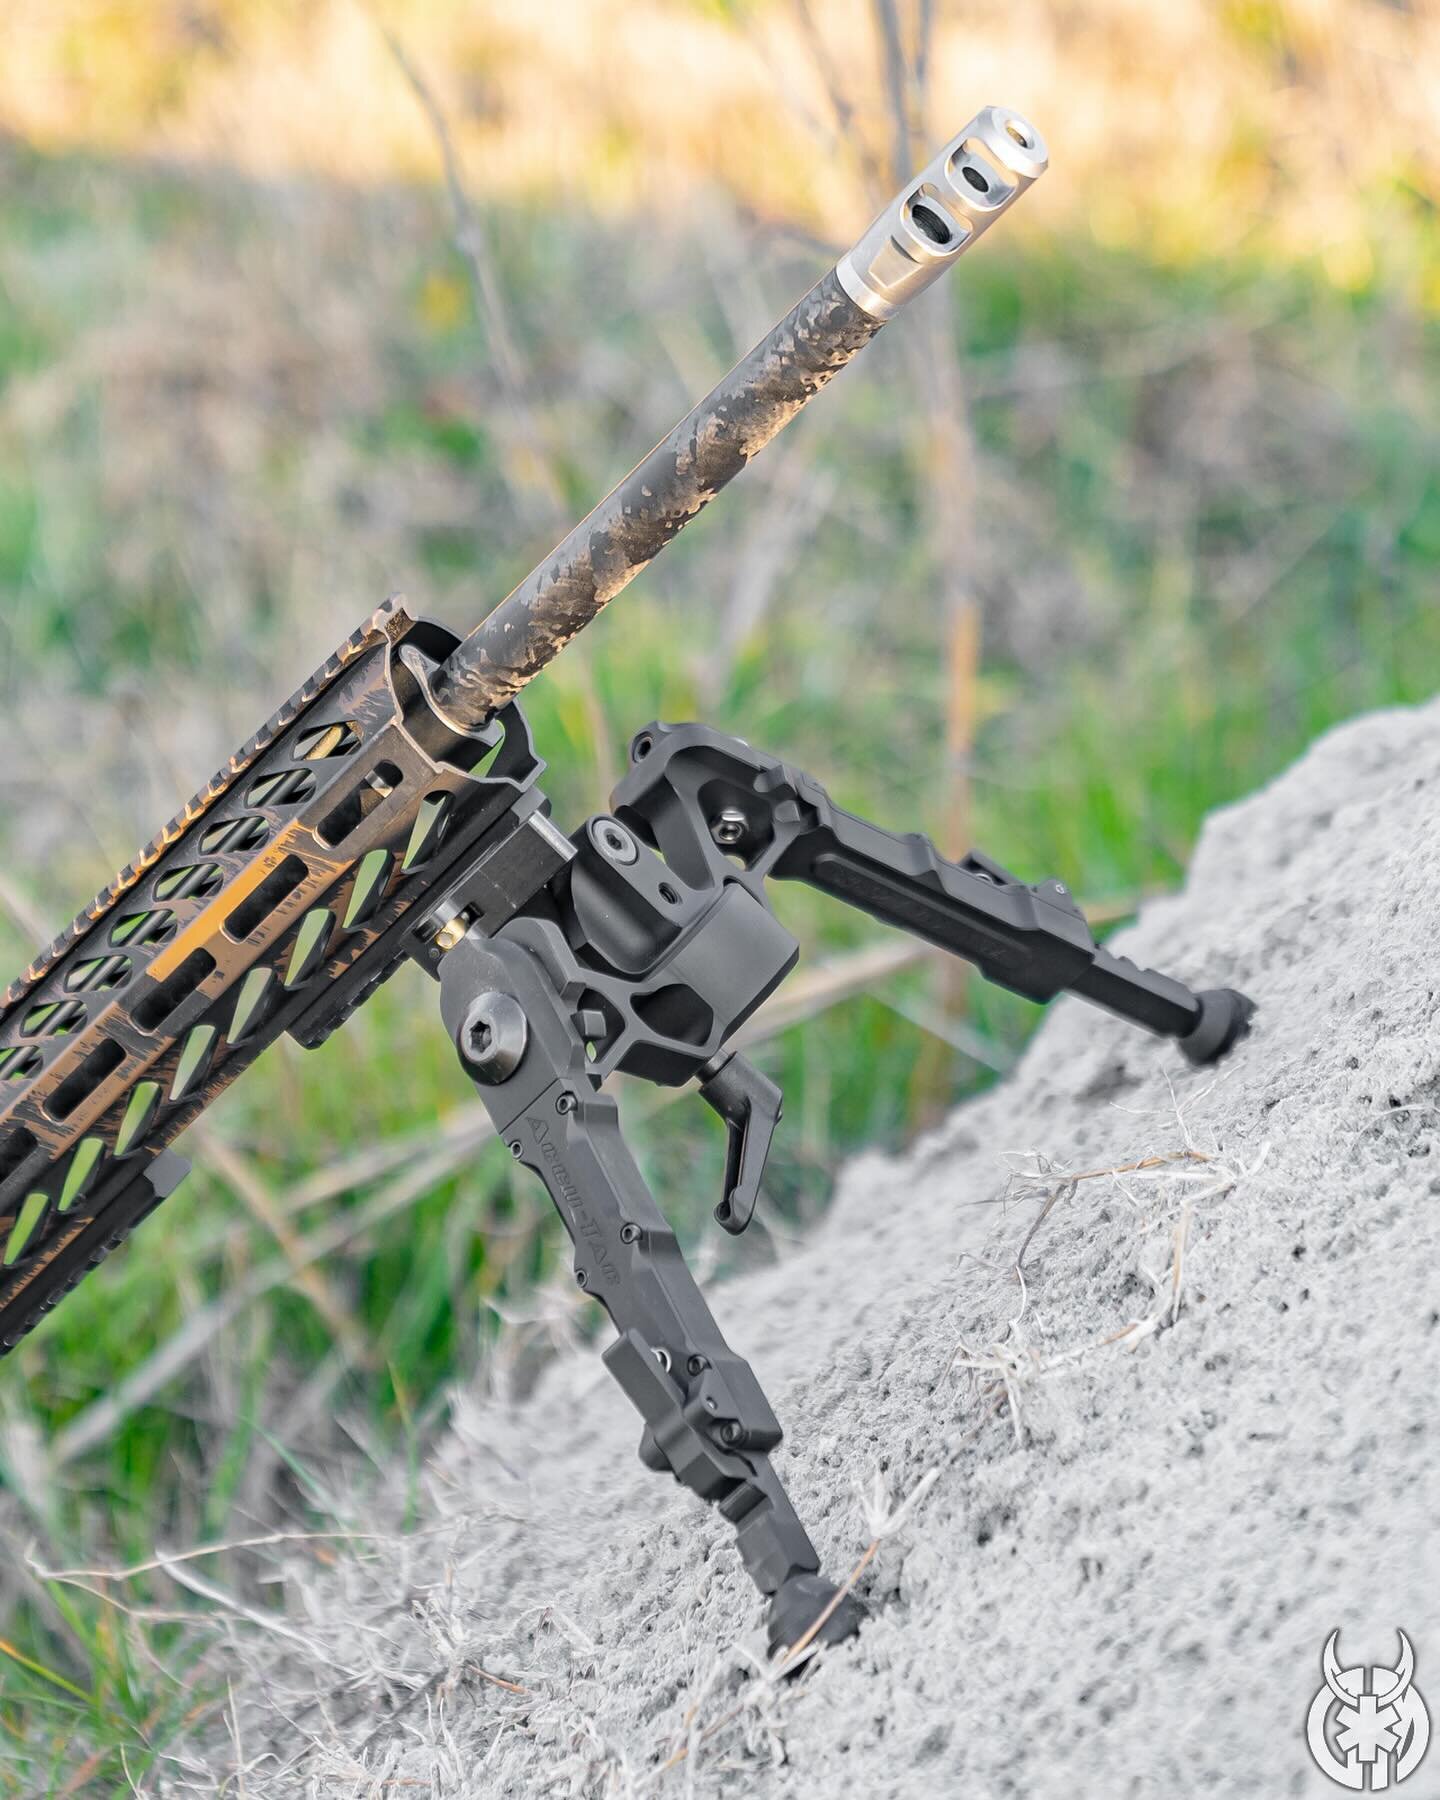 Check out the legs on that @accutac bipod!